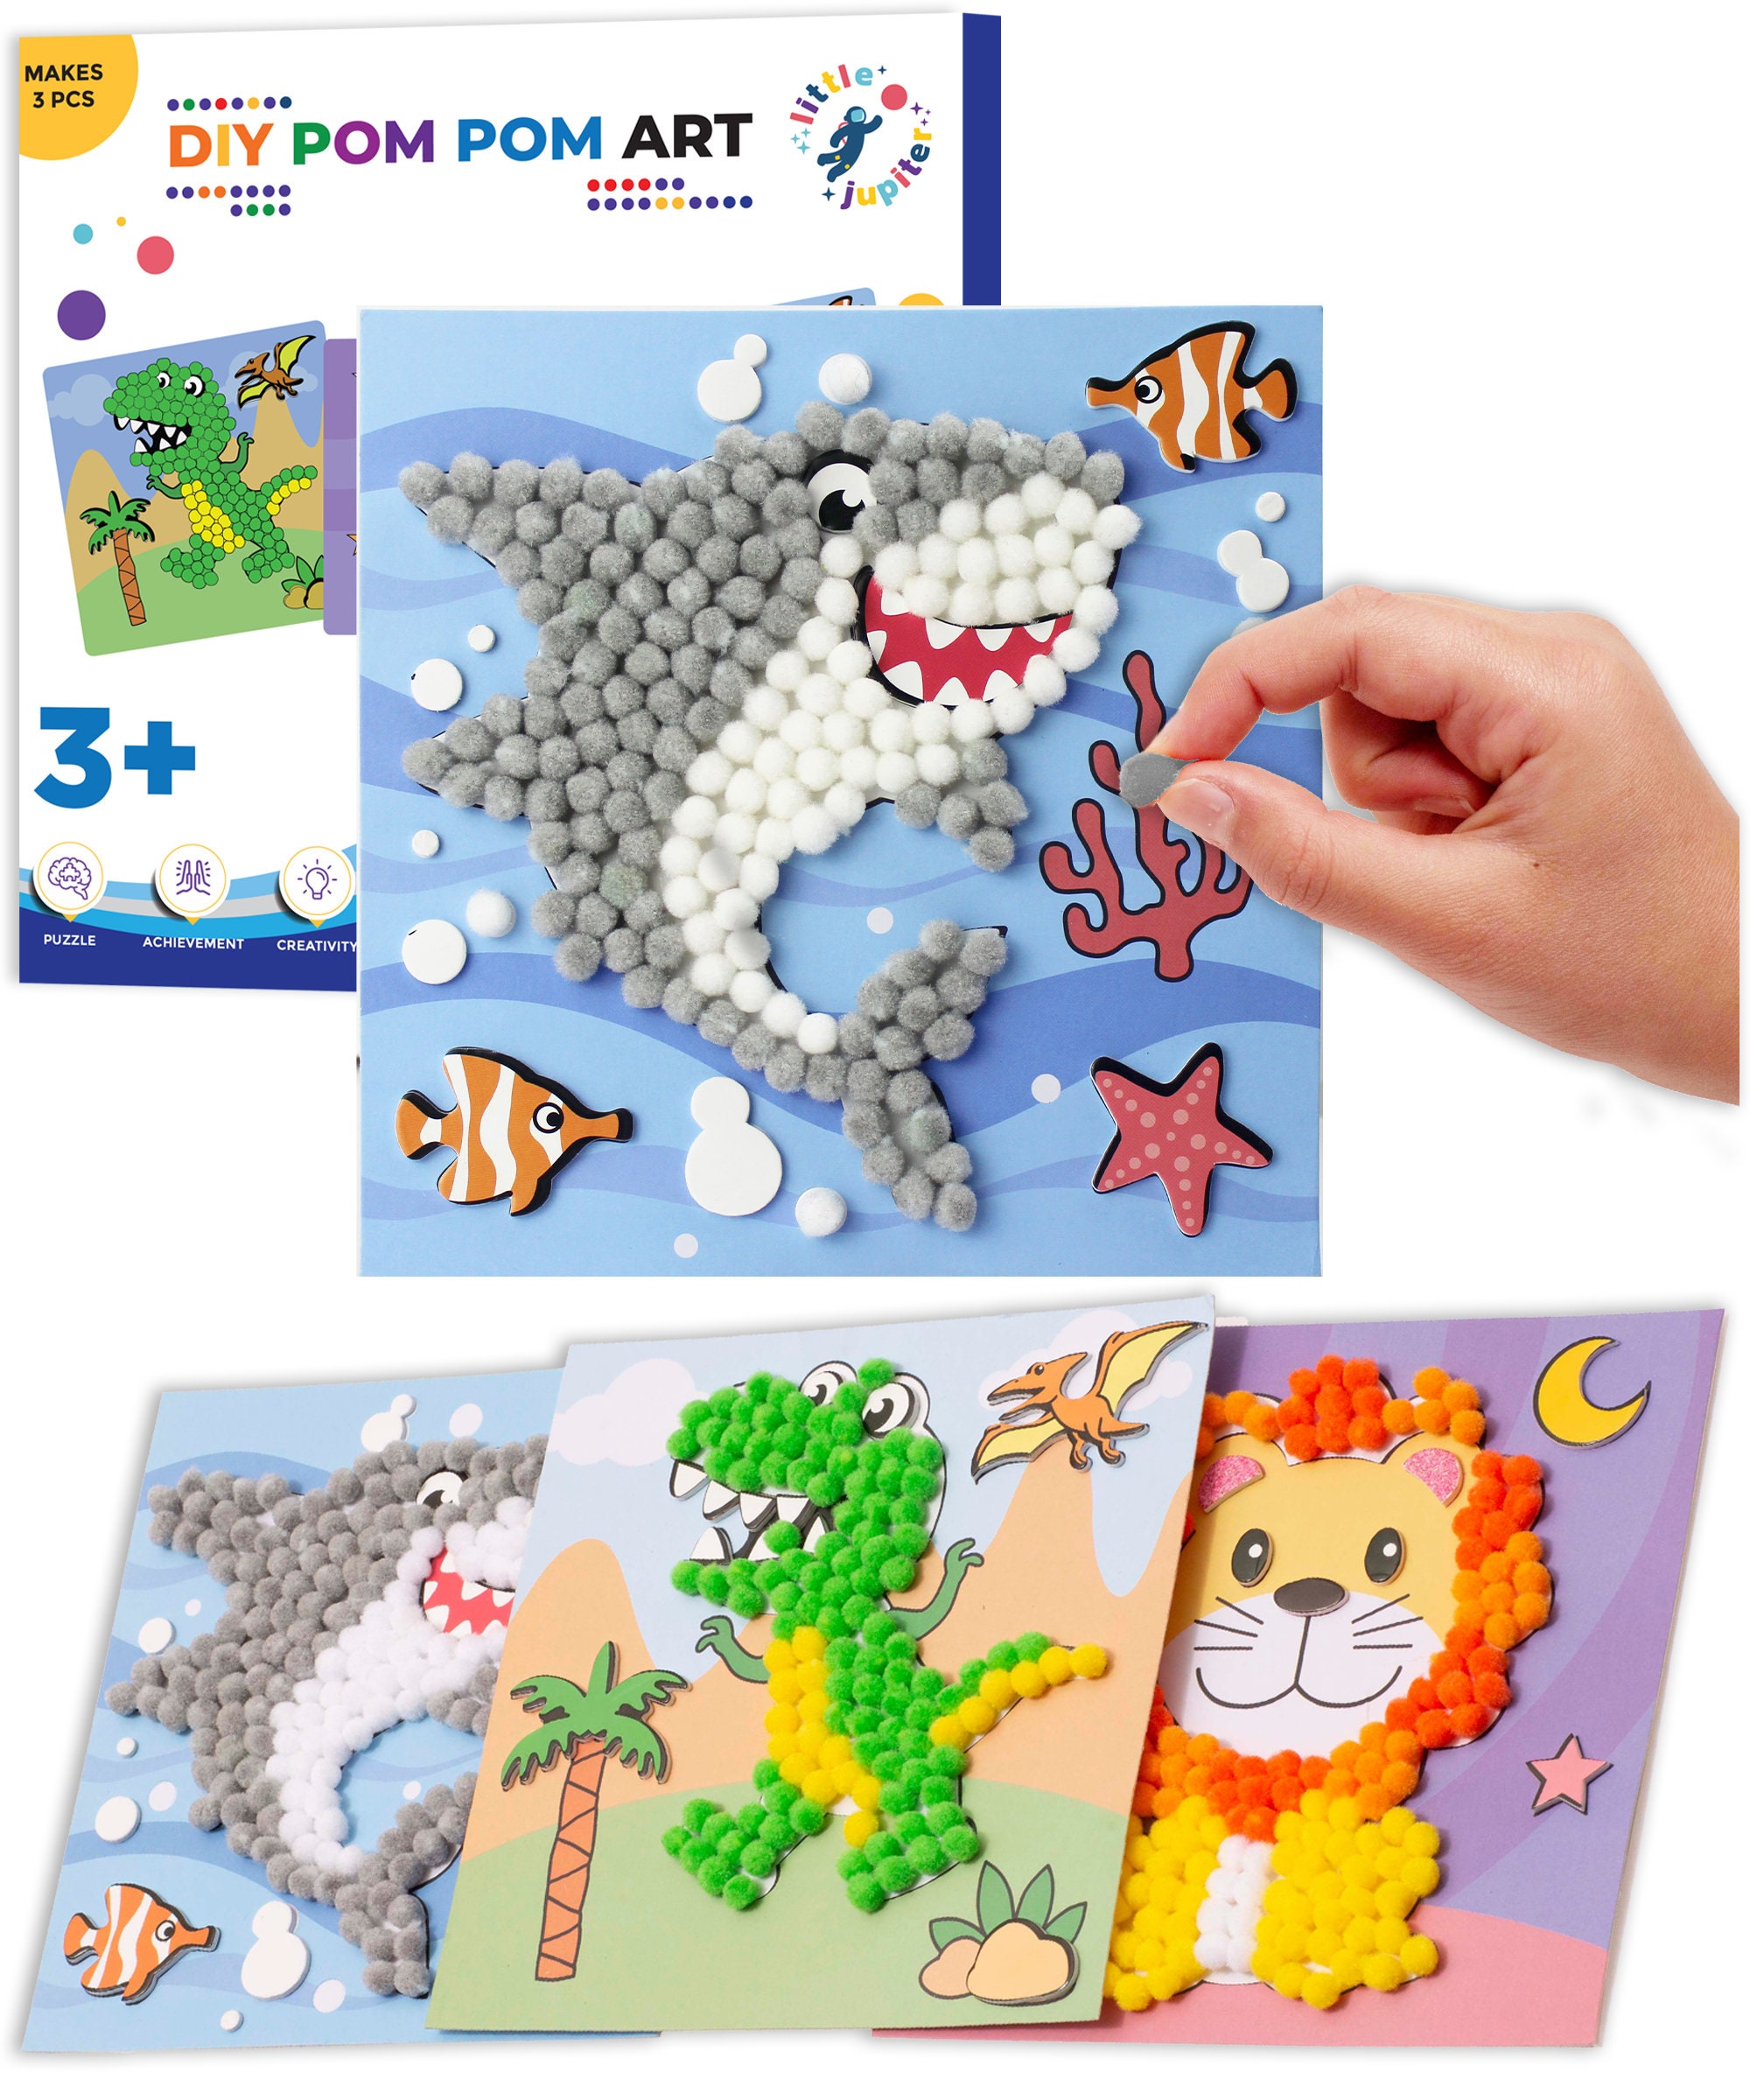 DIY Pom Pom Art - Makes 3 Art Pieces -Boy & Girl Crafts for Kids Age 3-5 -  Includes Lion, Shark and Dinosaur - Arts and Crafts for 3-5 yrs